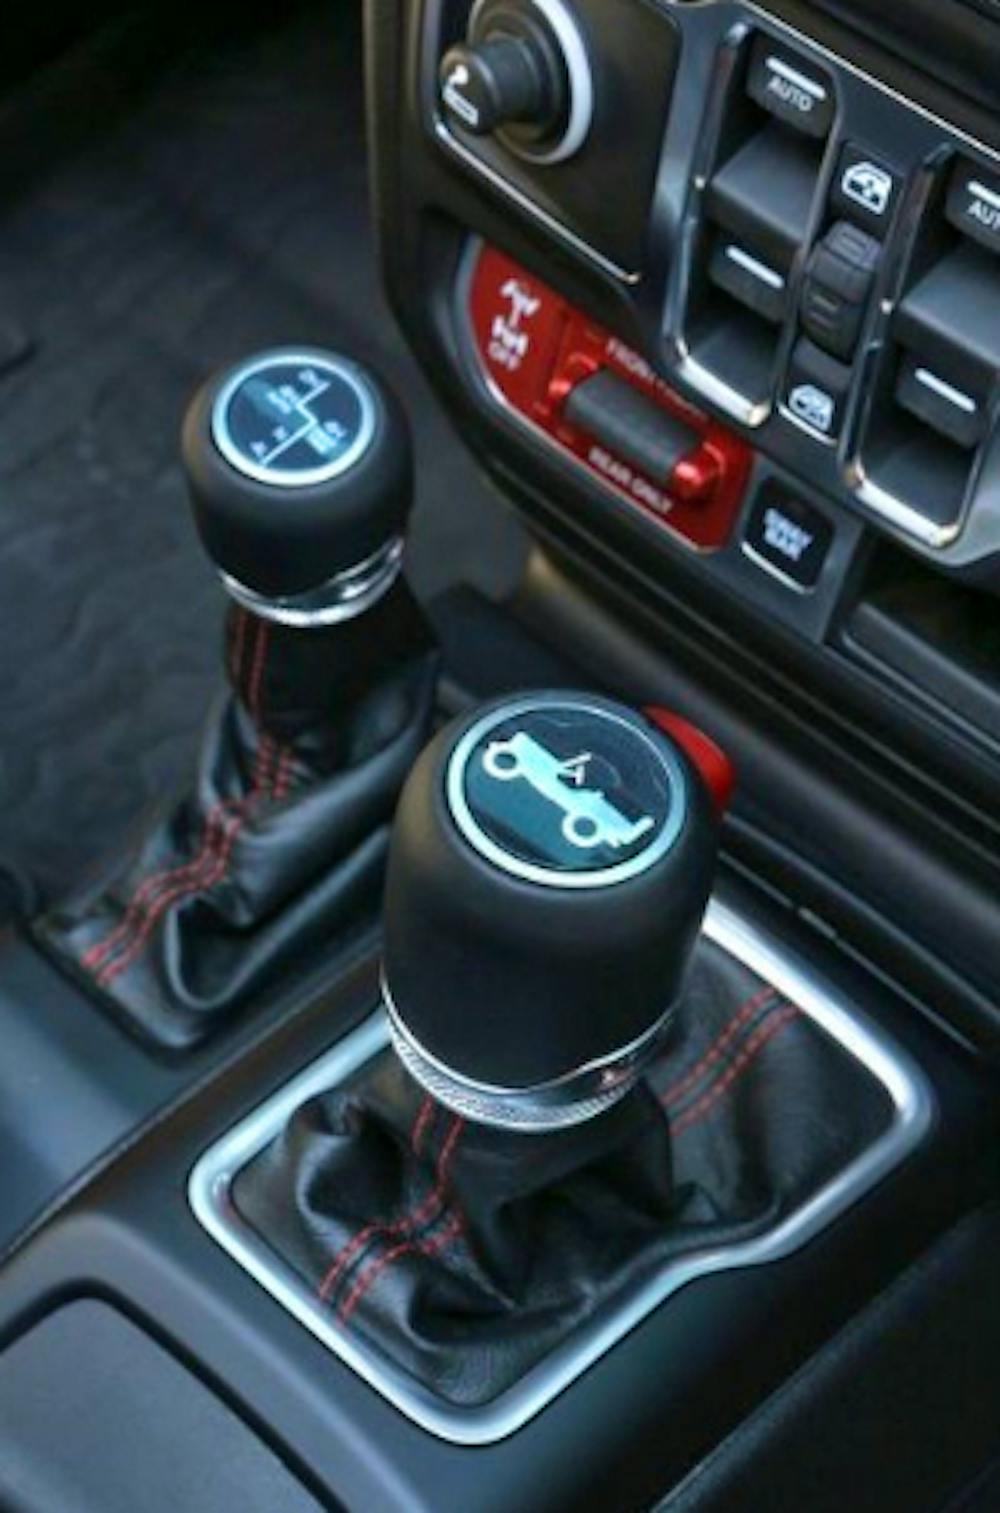 Fun and Affordable Stick-Shift Cars You Can Still Buy In 2022 - Car Talk